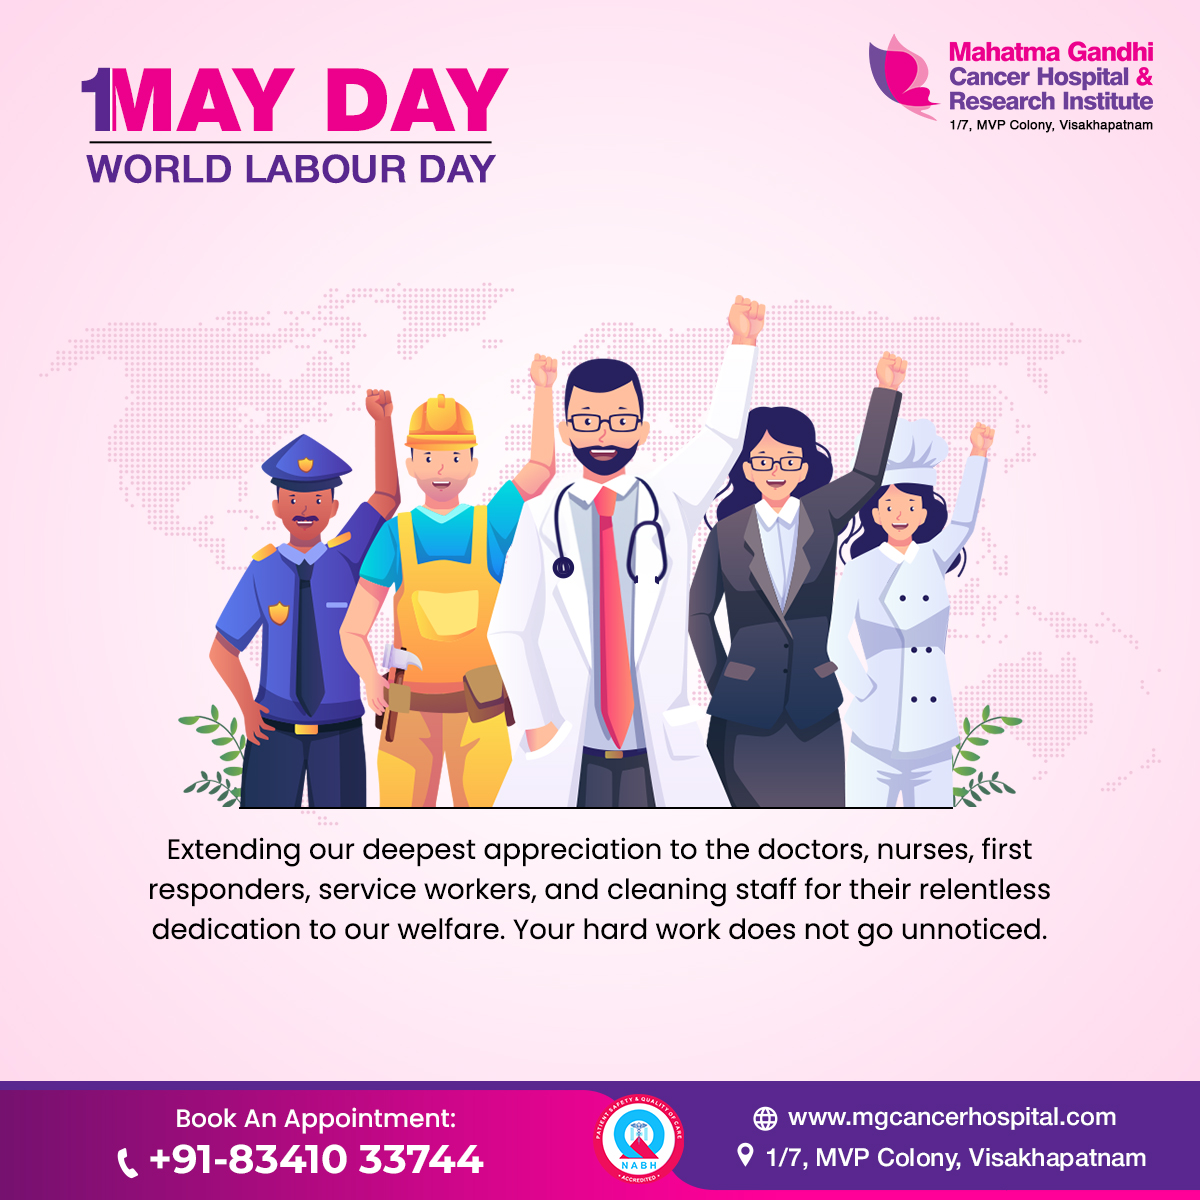 Saluting our healthcare heroes and all workers on May Day. Your tireless efforts ensure our wellbeing. Thank you for being our everyday guardians. 
#WorldLabourDay #HealthcareHeroes #ThankYouWorkers  #MGCHRI #MGCancerHospital